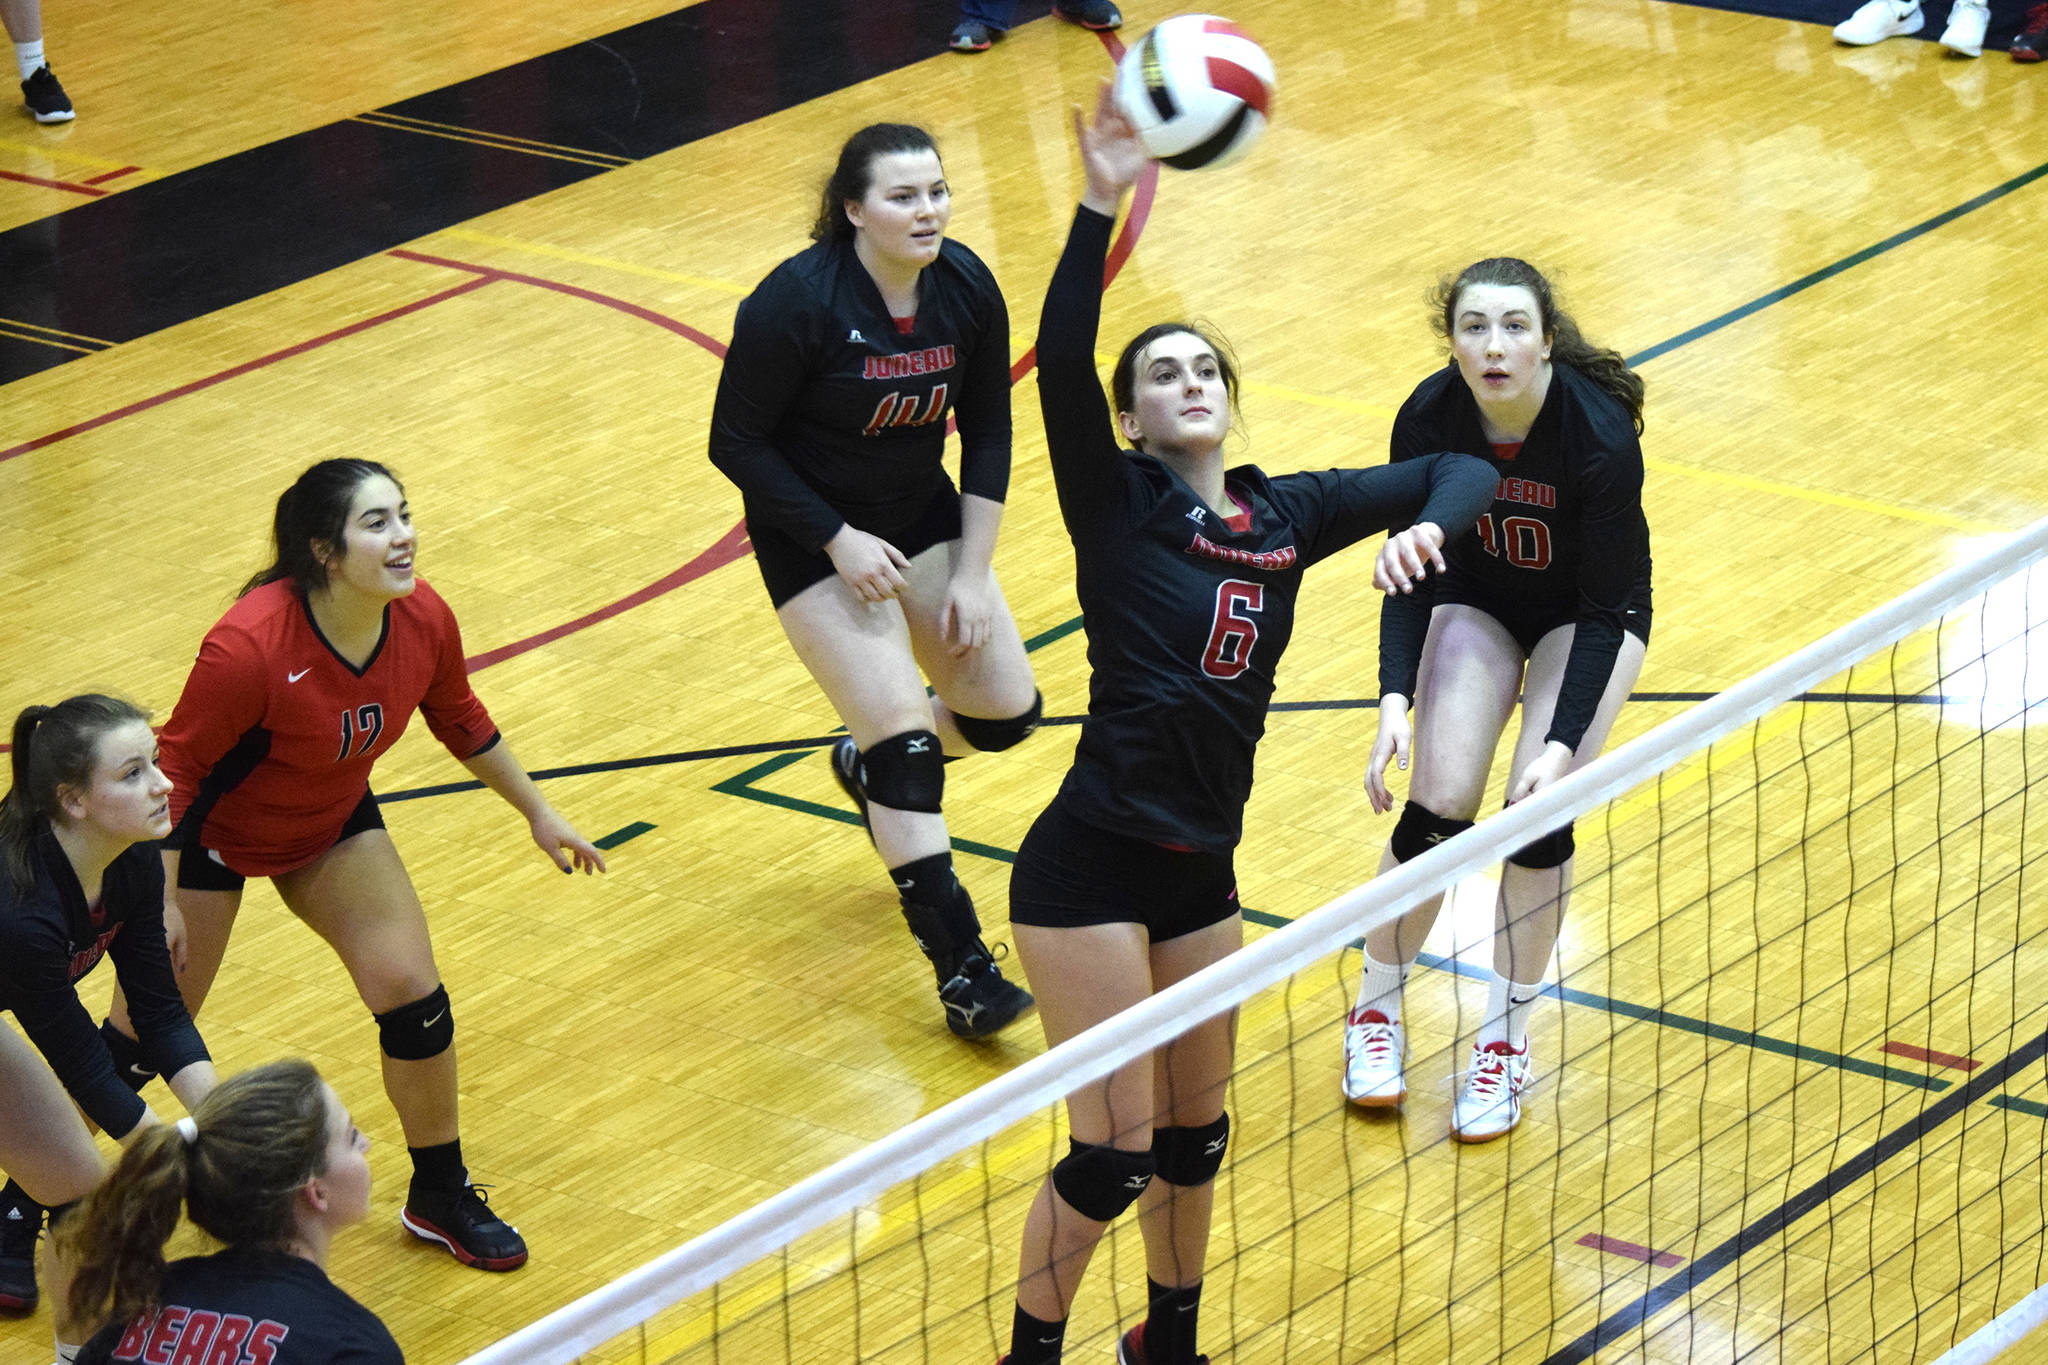 Juneau-Douglas: Yadaat.at Kalé’s Addie Prussing spikes the ball against Craig at the Juneau Invitational Volleyball Extravaganza at Juneau-Douglas High School: Yadaat.at Kalé on Friday, Oct. 11, 2019. (Nolin Ainsworth | Juneau Empire)